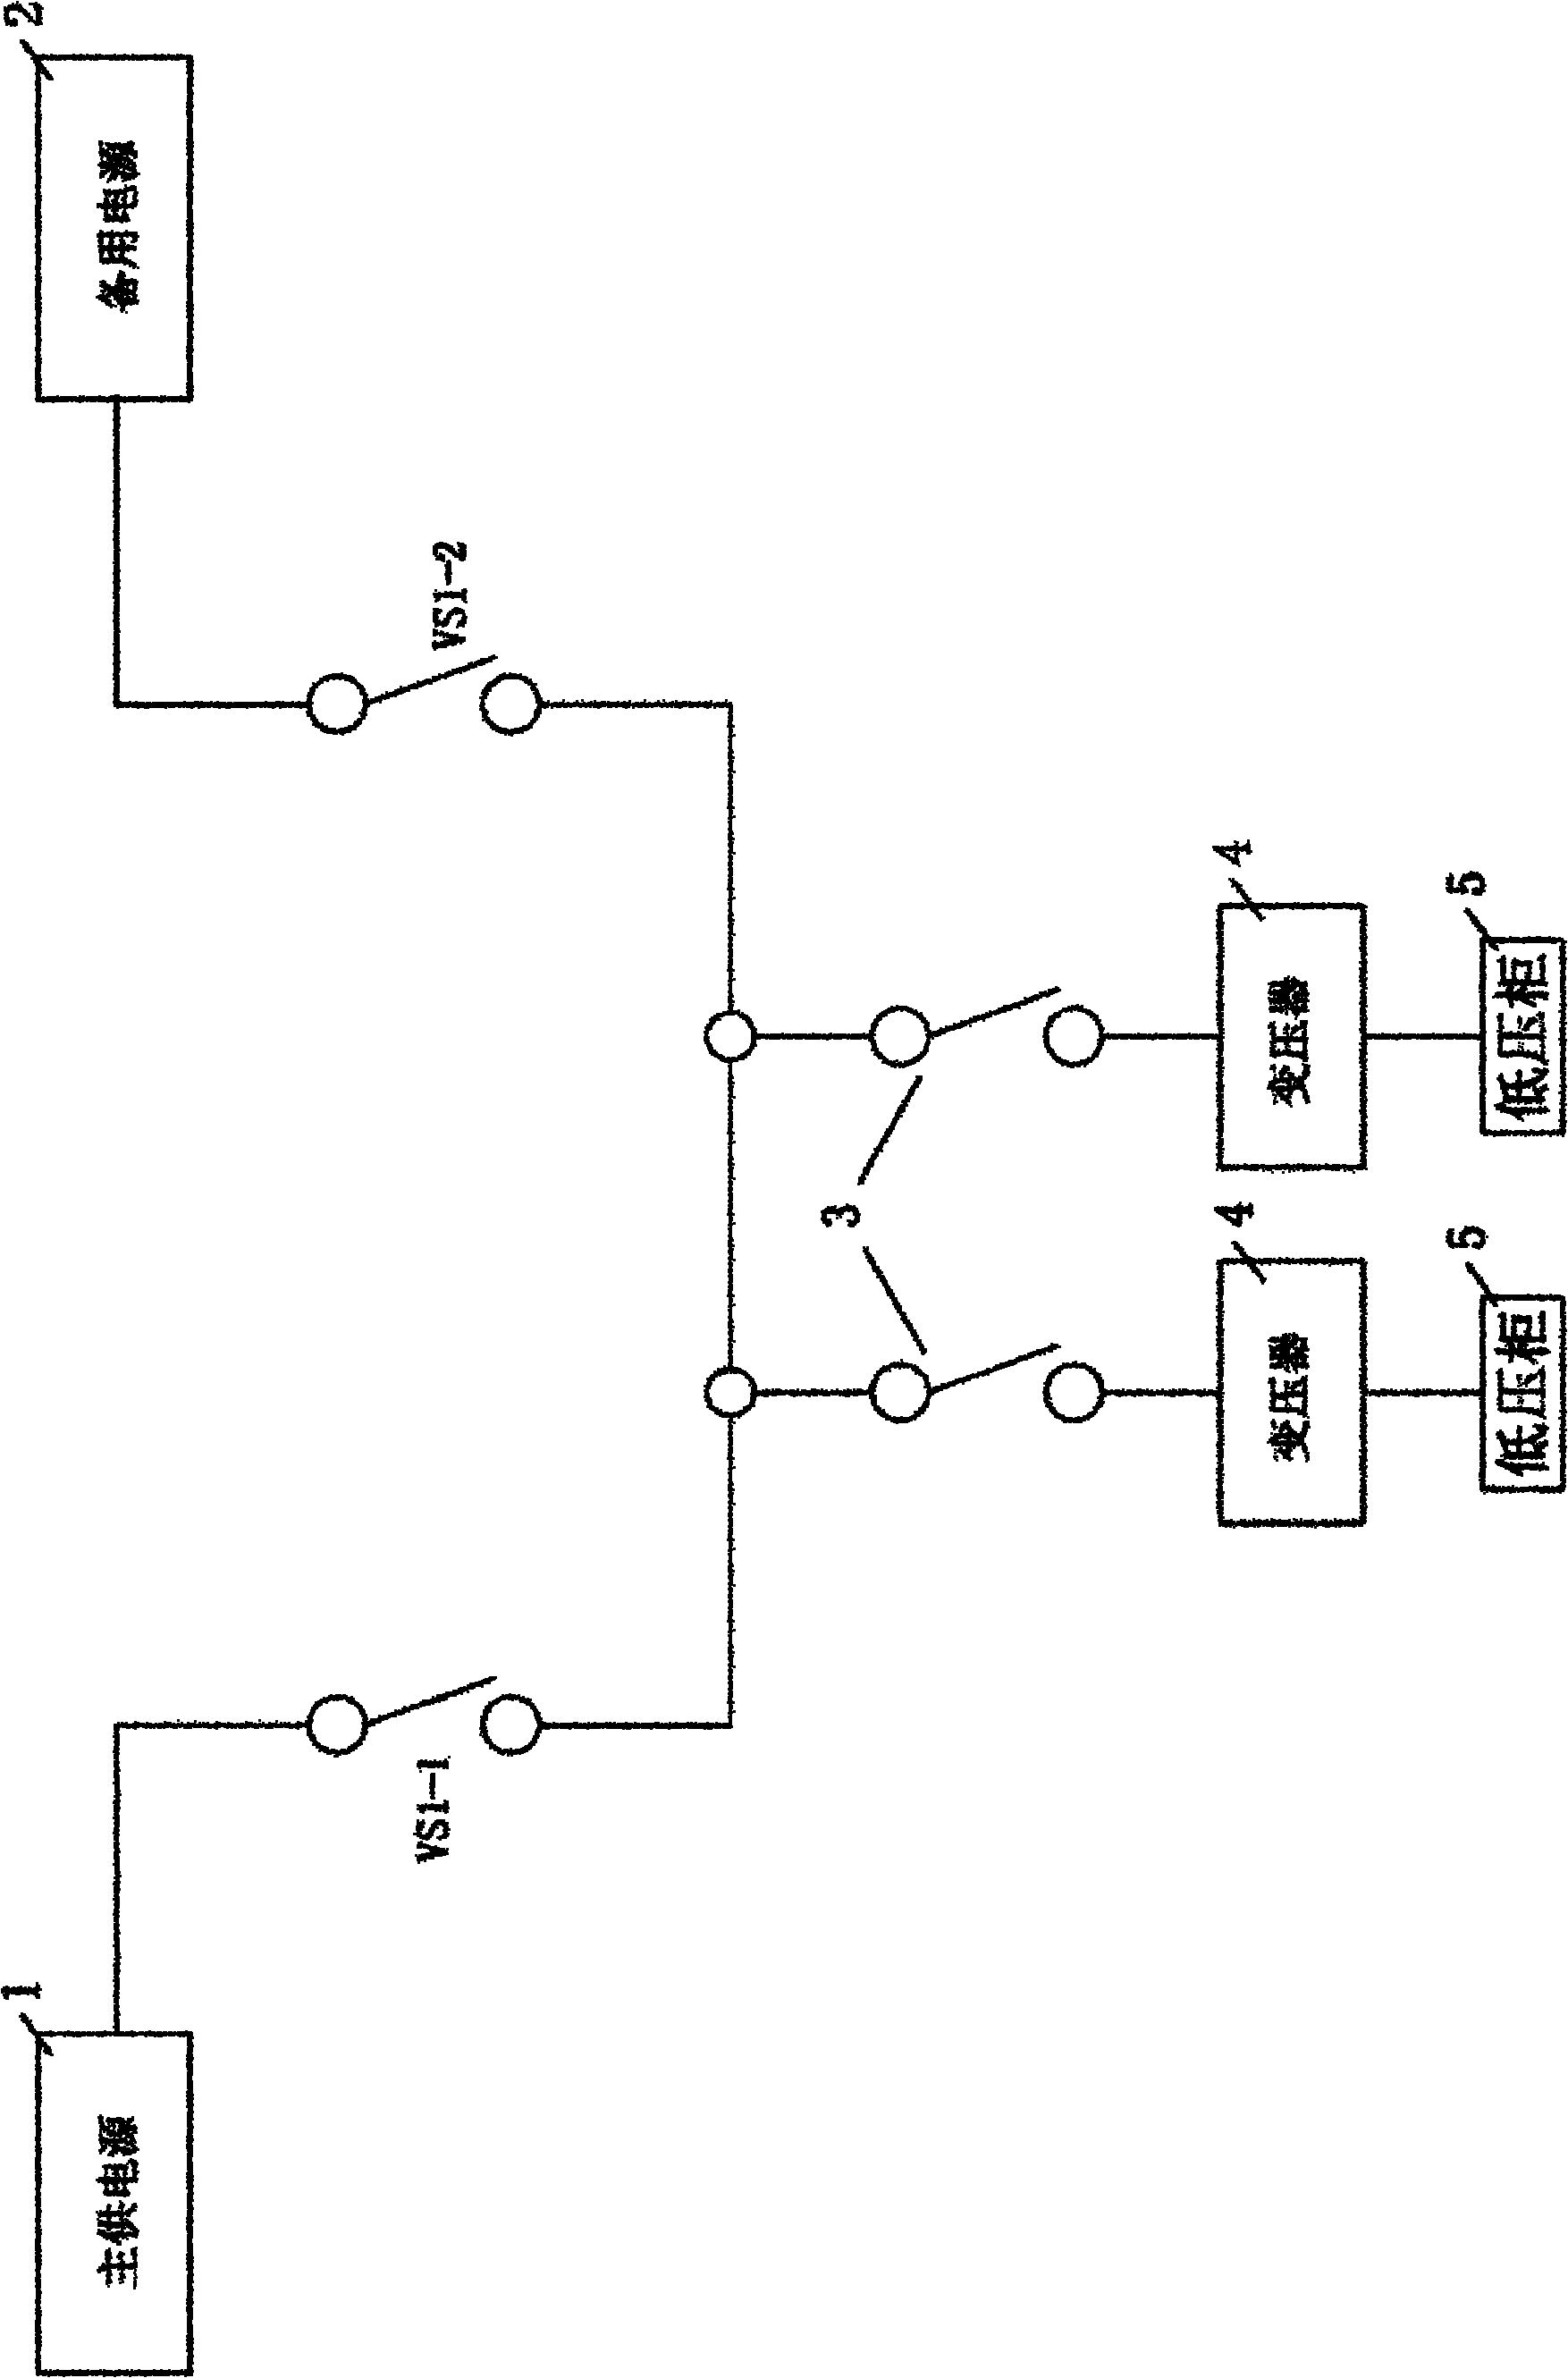 Self-powered automatic switching and closing high-voltage control system